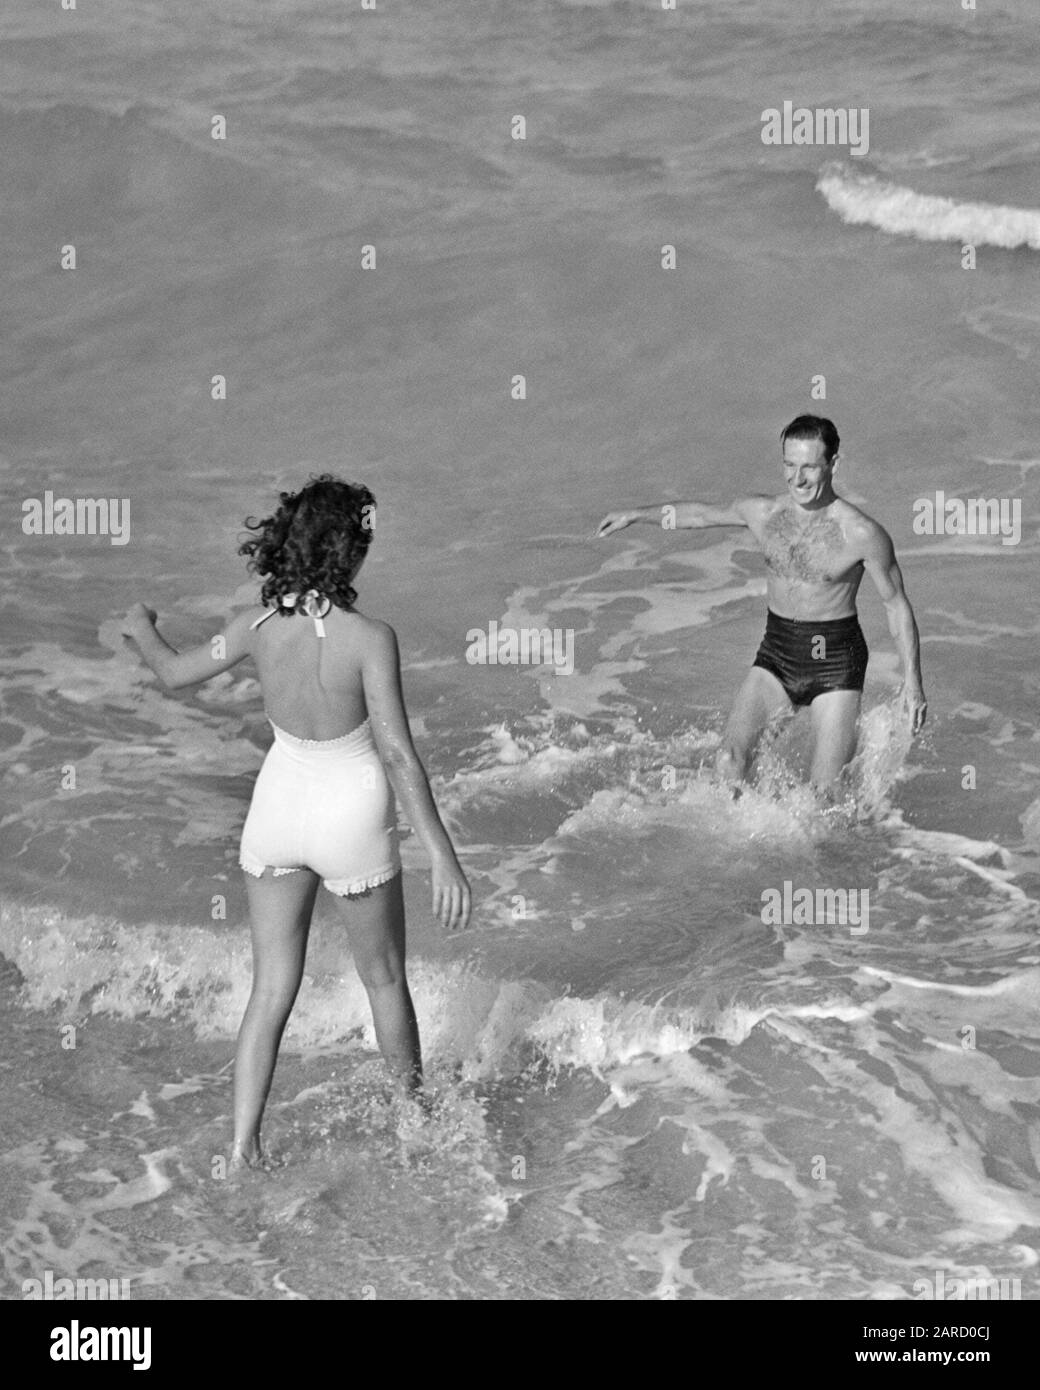 https://c8.alamy.com/comp/2ARD0CJ/1930s-1940s-vacation-couple-wearing-bathing-suits-playing-in-surf-at-beach-woman-running-toward-smiling-man-florida-usa-b7126-har001-hars-1-fitness-silly-tropical-healthy-comic-vacation-strong-joy-lifestyle-celebration-females-married-spouse-husbands-healthiness-united-states-friendship-full-length-ladies-persons-united-states-of-america-caring-males-surf-bw-partner-north-america-north-american-activity-humorous-happiness-physical-leisure-strength-excitement-recreation-toward-comical-at-in-attraction-connection-conceptual-comedy-flexibility-muscles-bathing-suits-personal-attachment-2ARD0CJ.jpg